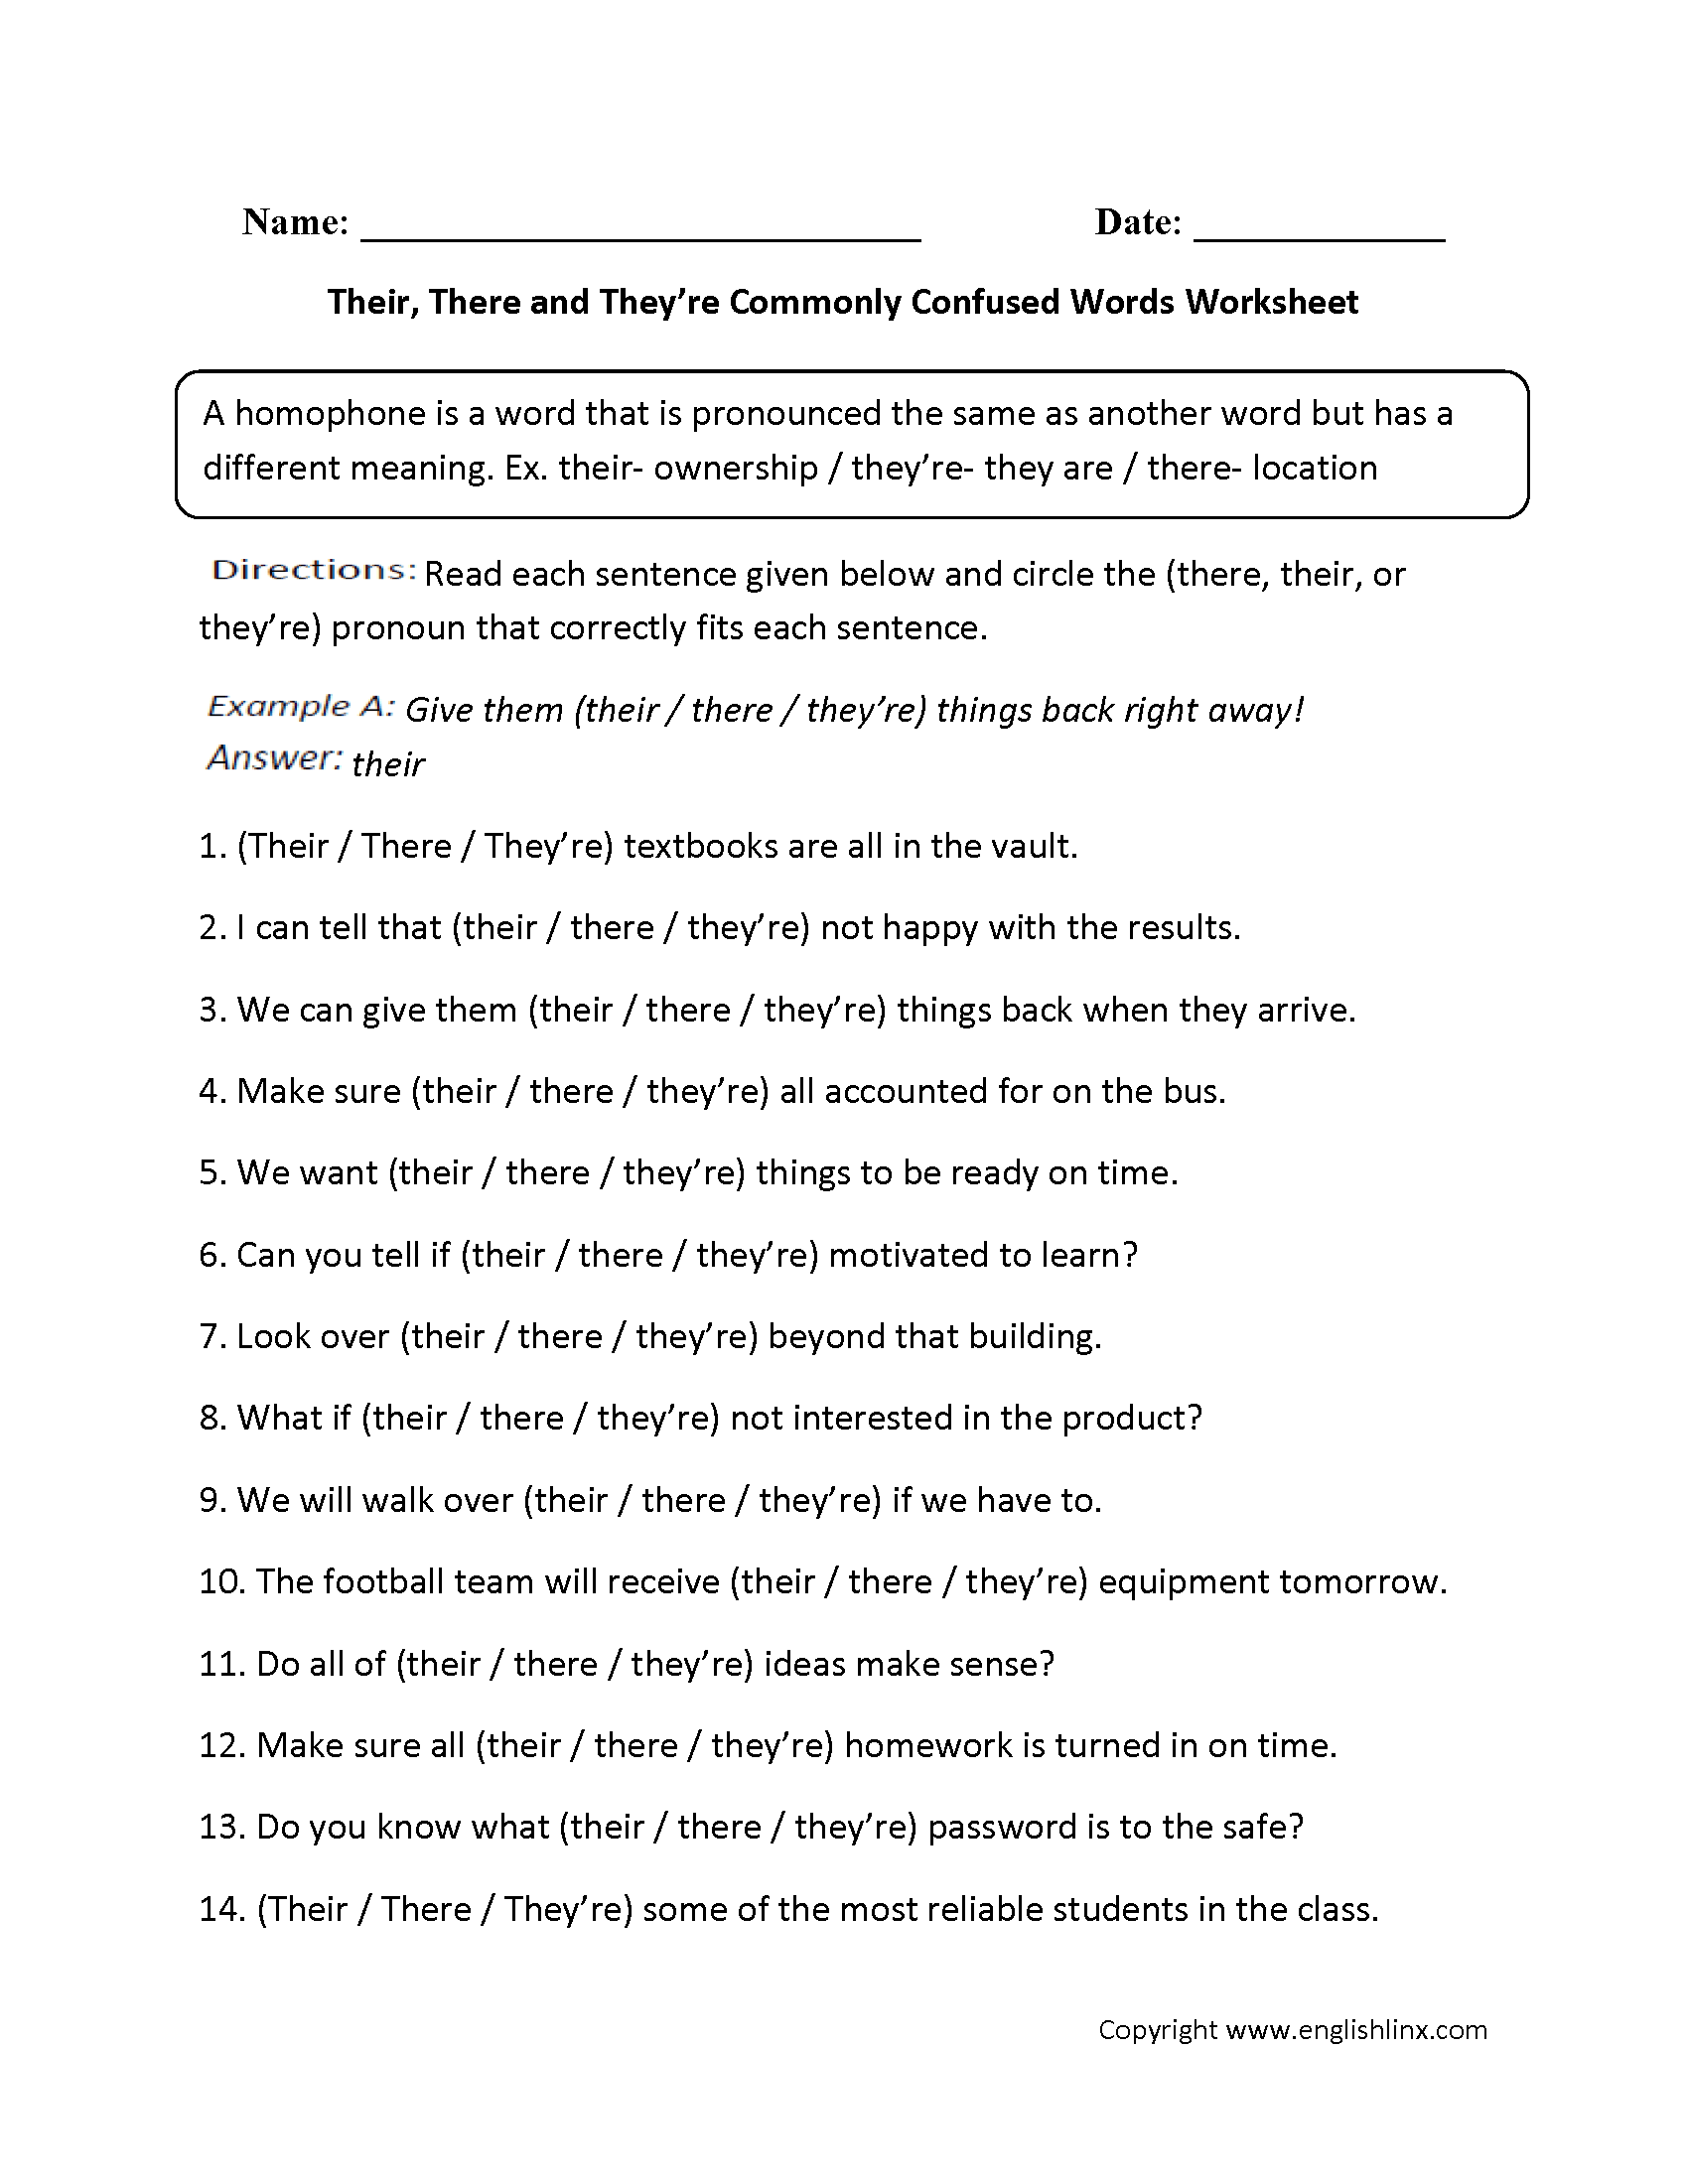 Their, There, They're Commonly Confused Words Worksheets